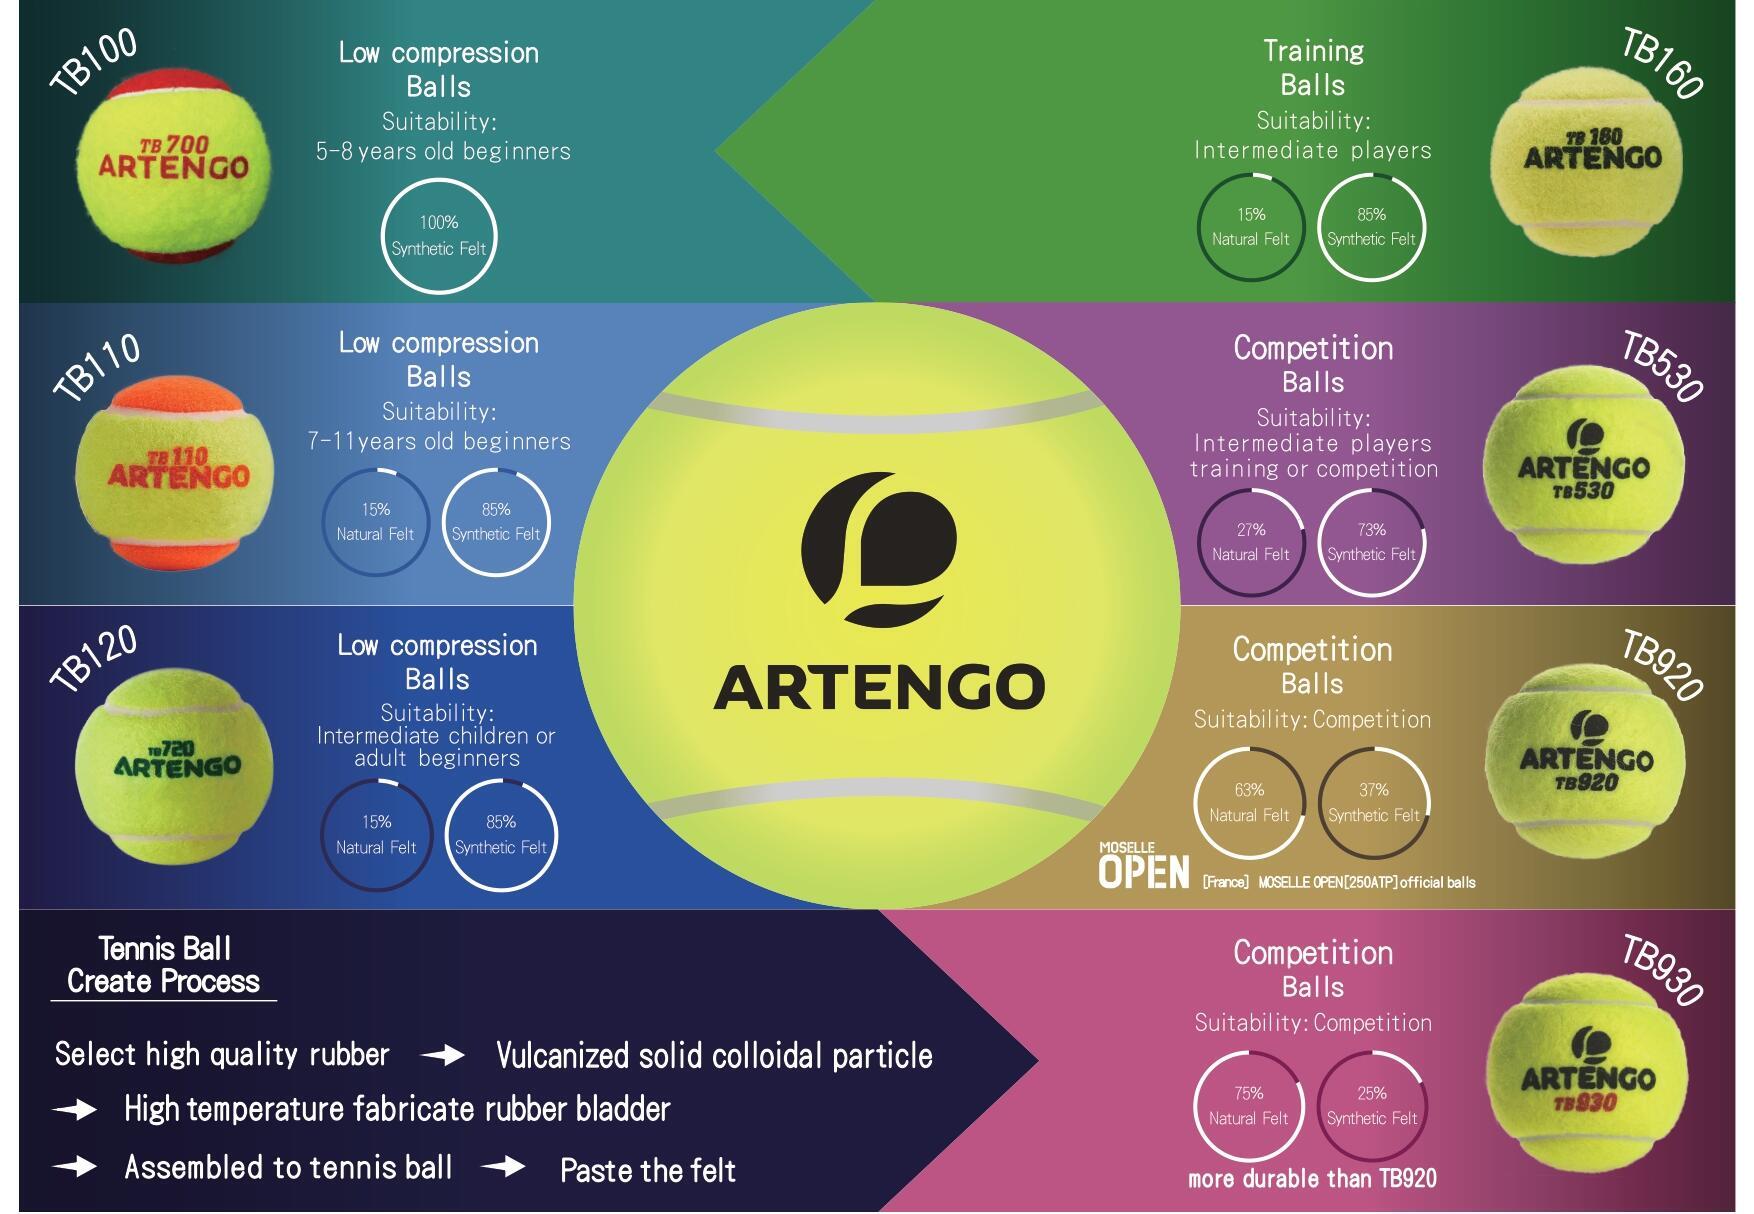 Tennis | How to choose the suitable tennis balls for your level/need? 